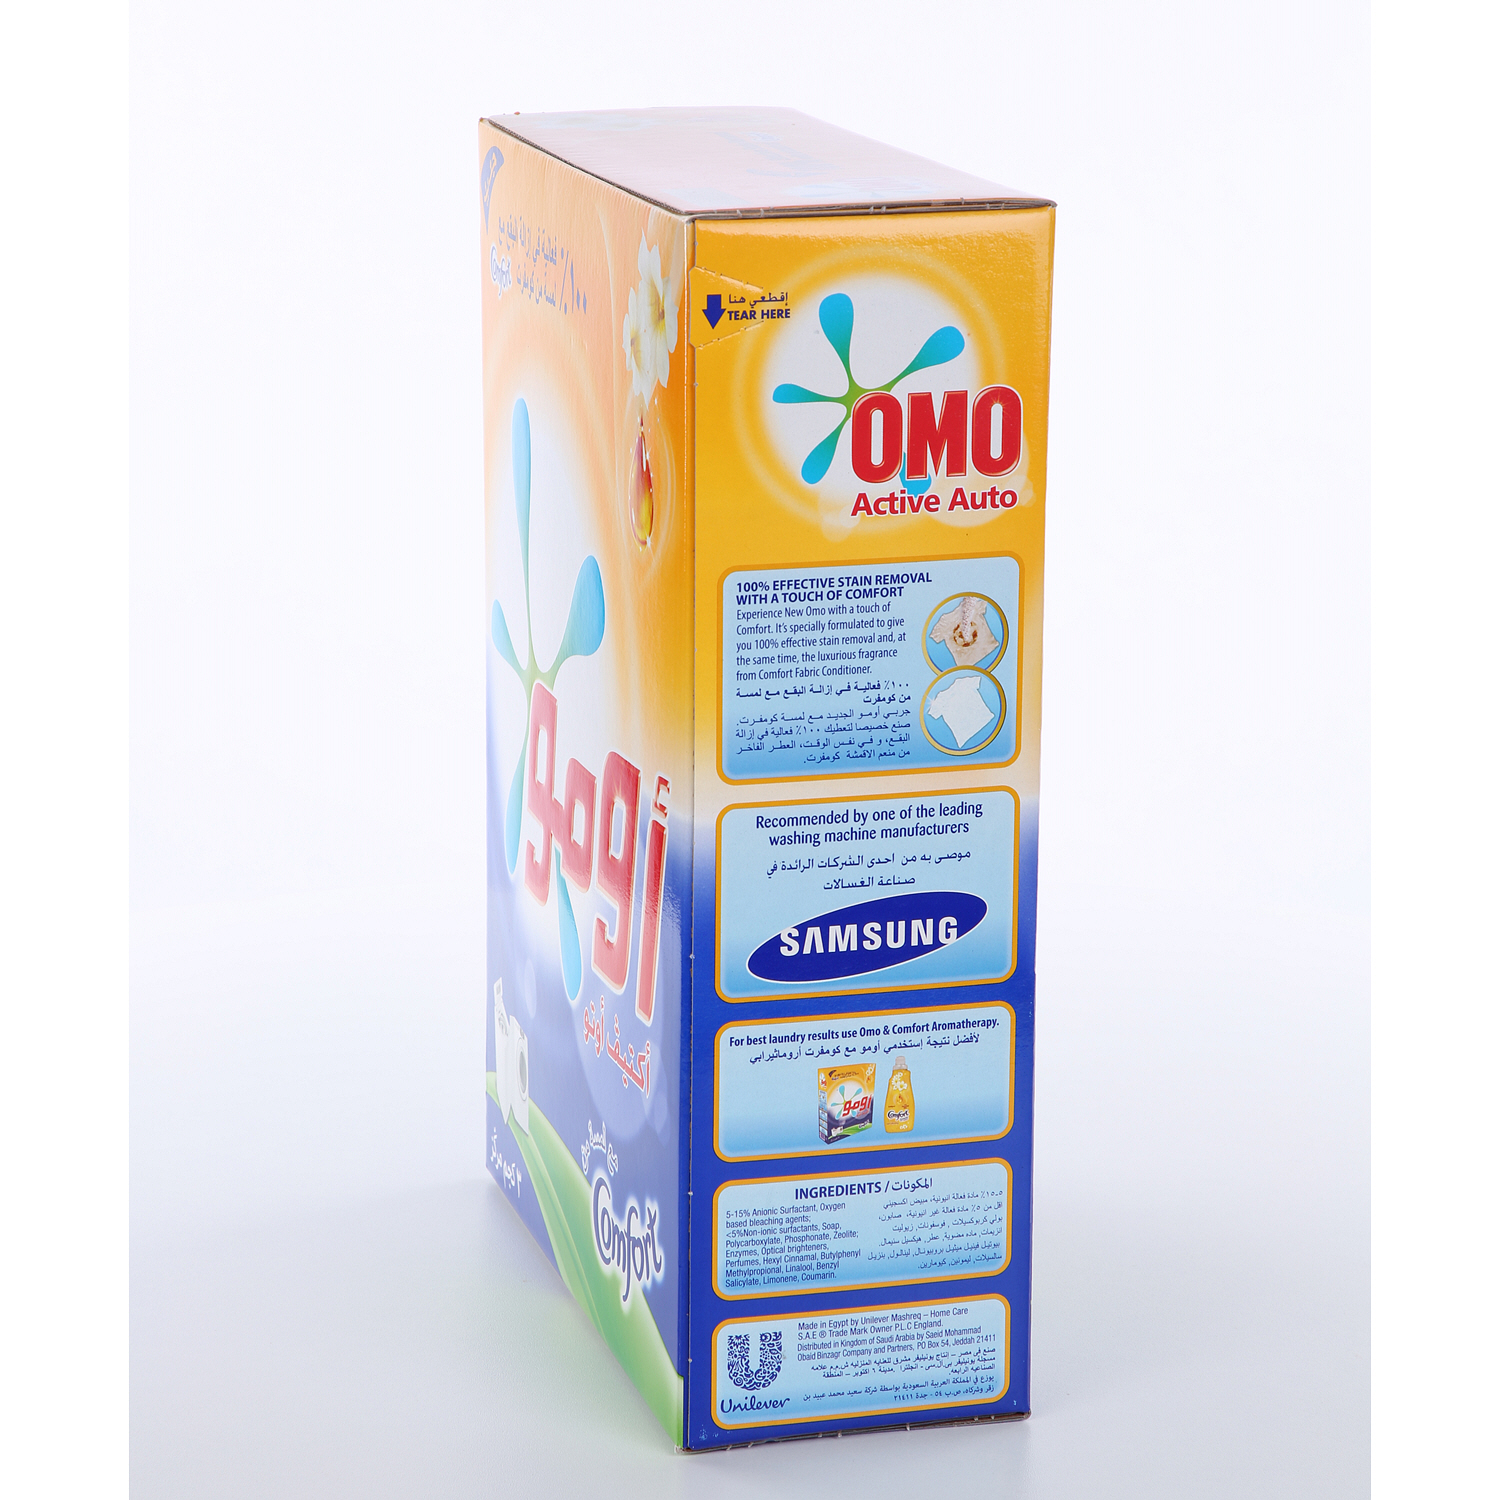 Omo Active Auto Detergent With A Touch Of Comfort 3 Kg